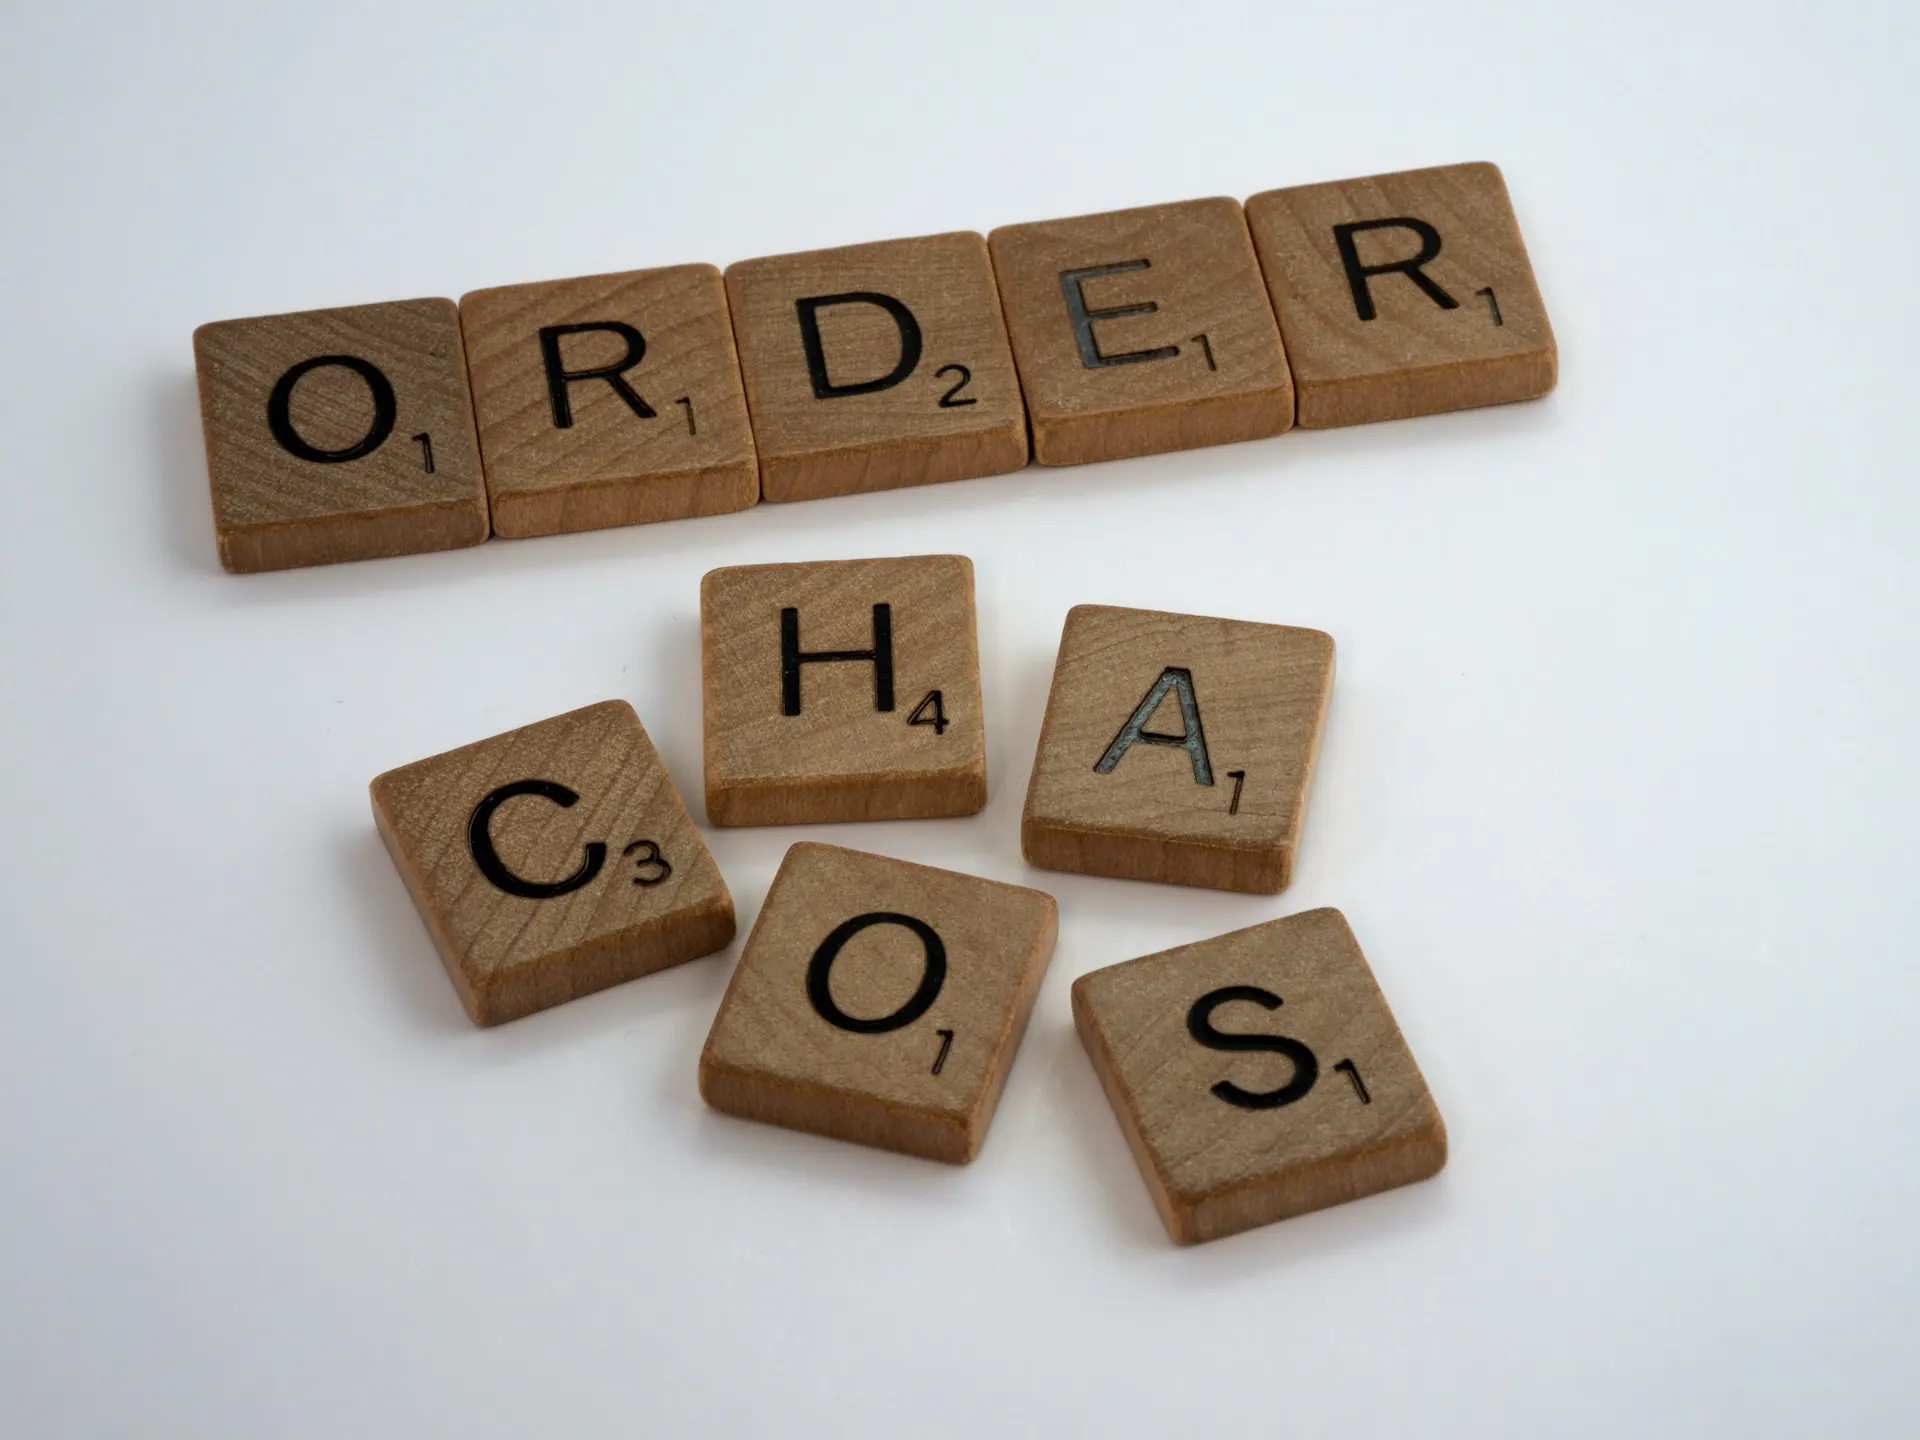 Ten scrabble letters spelling the words &#039;Order' in the top and 'Chaos' in the lowe part. The letters forming 'Order' are nicely arranged, while the letter spelling 'Chaos' are arranged in a chaotic way.